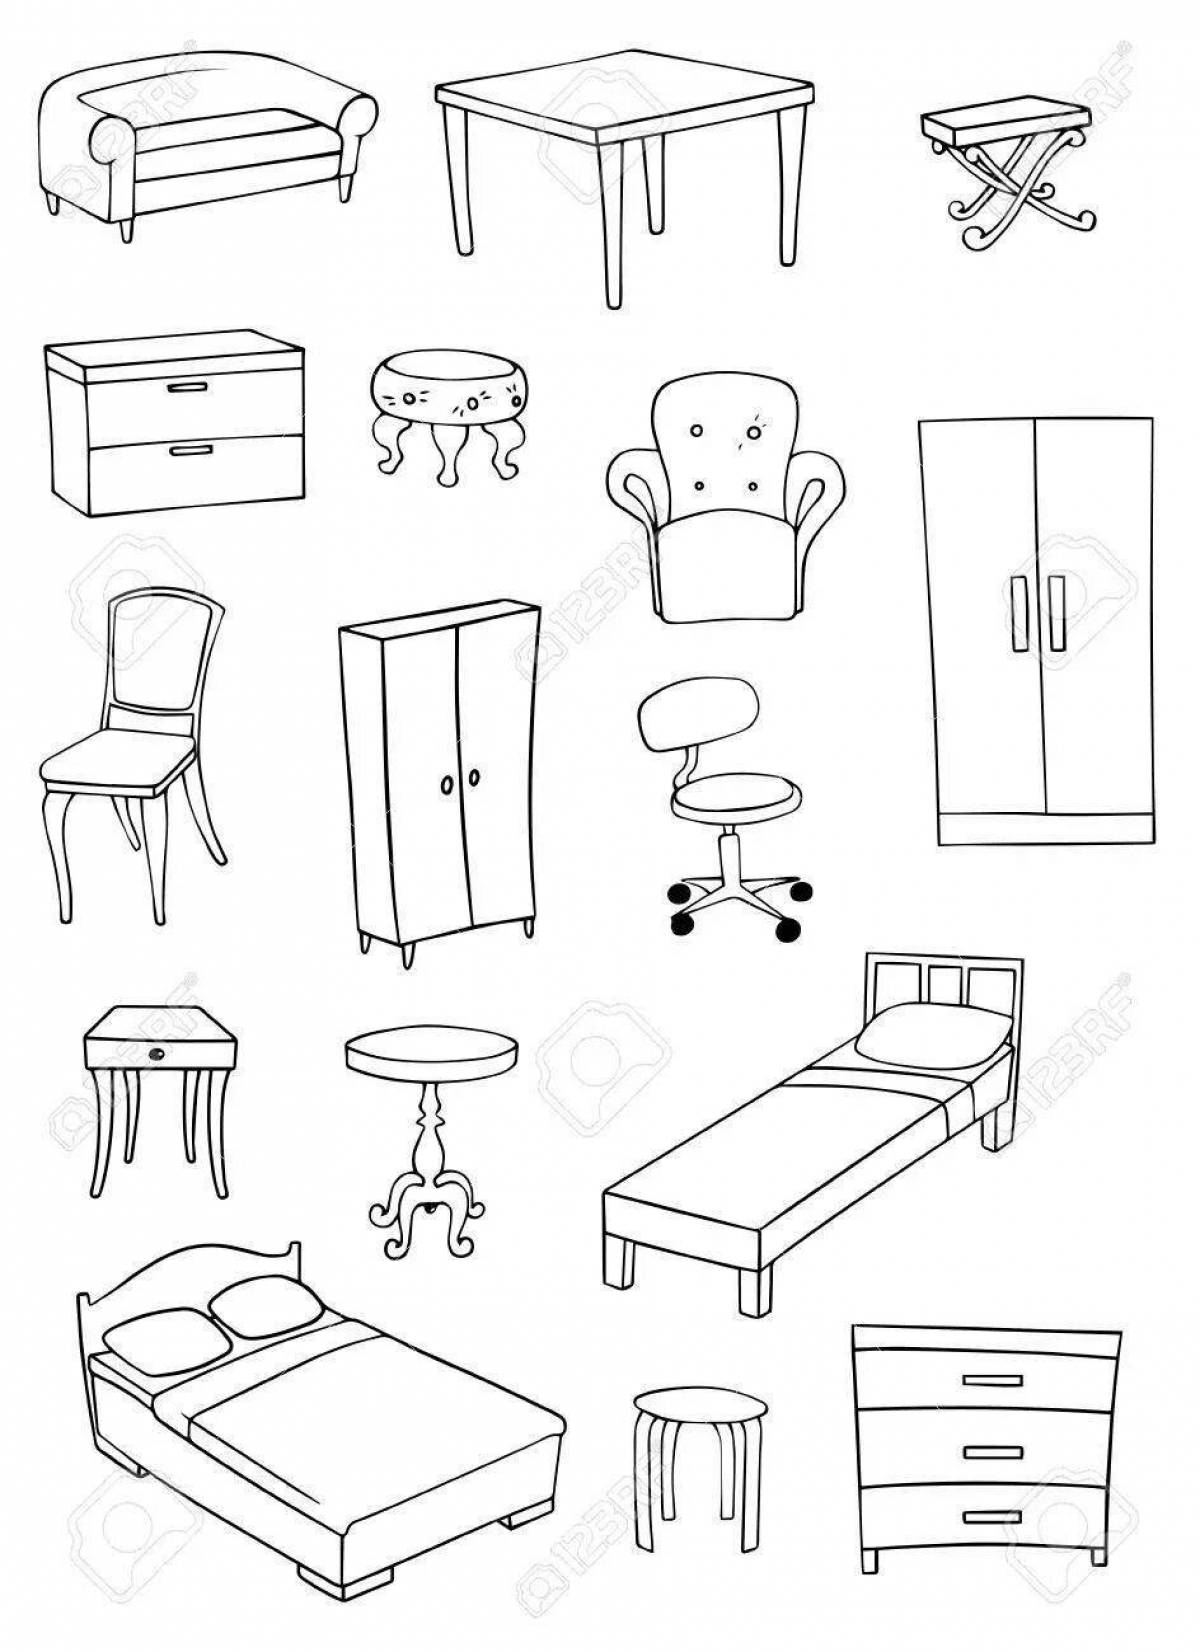 Colorful interior items coloring pages for children